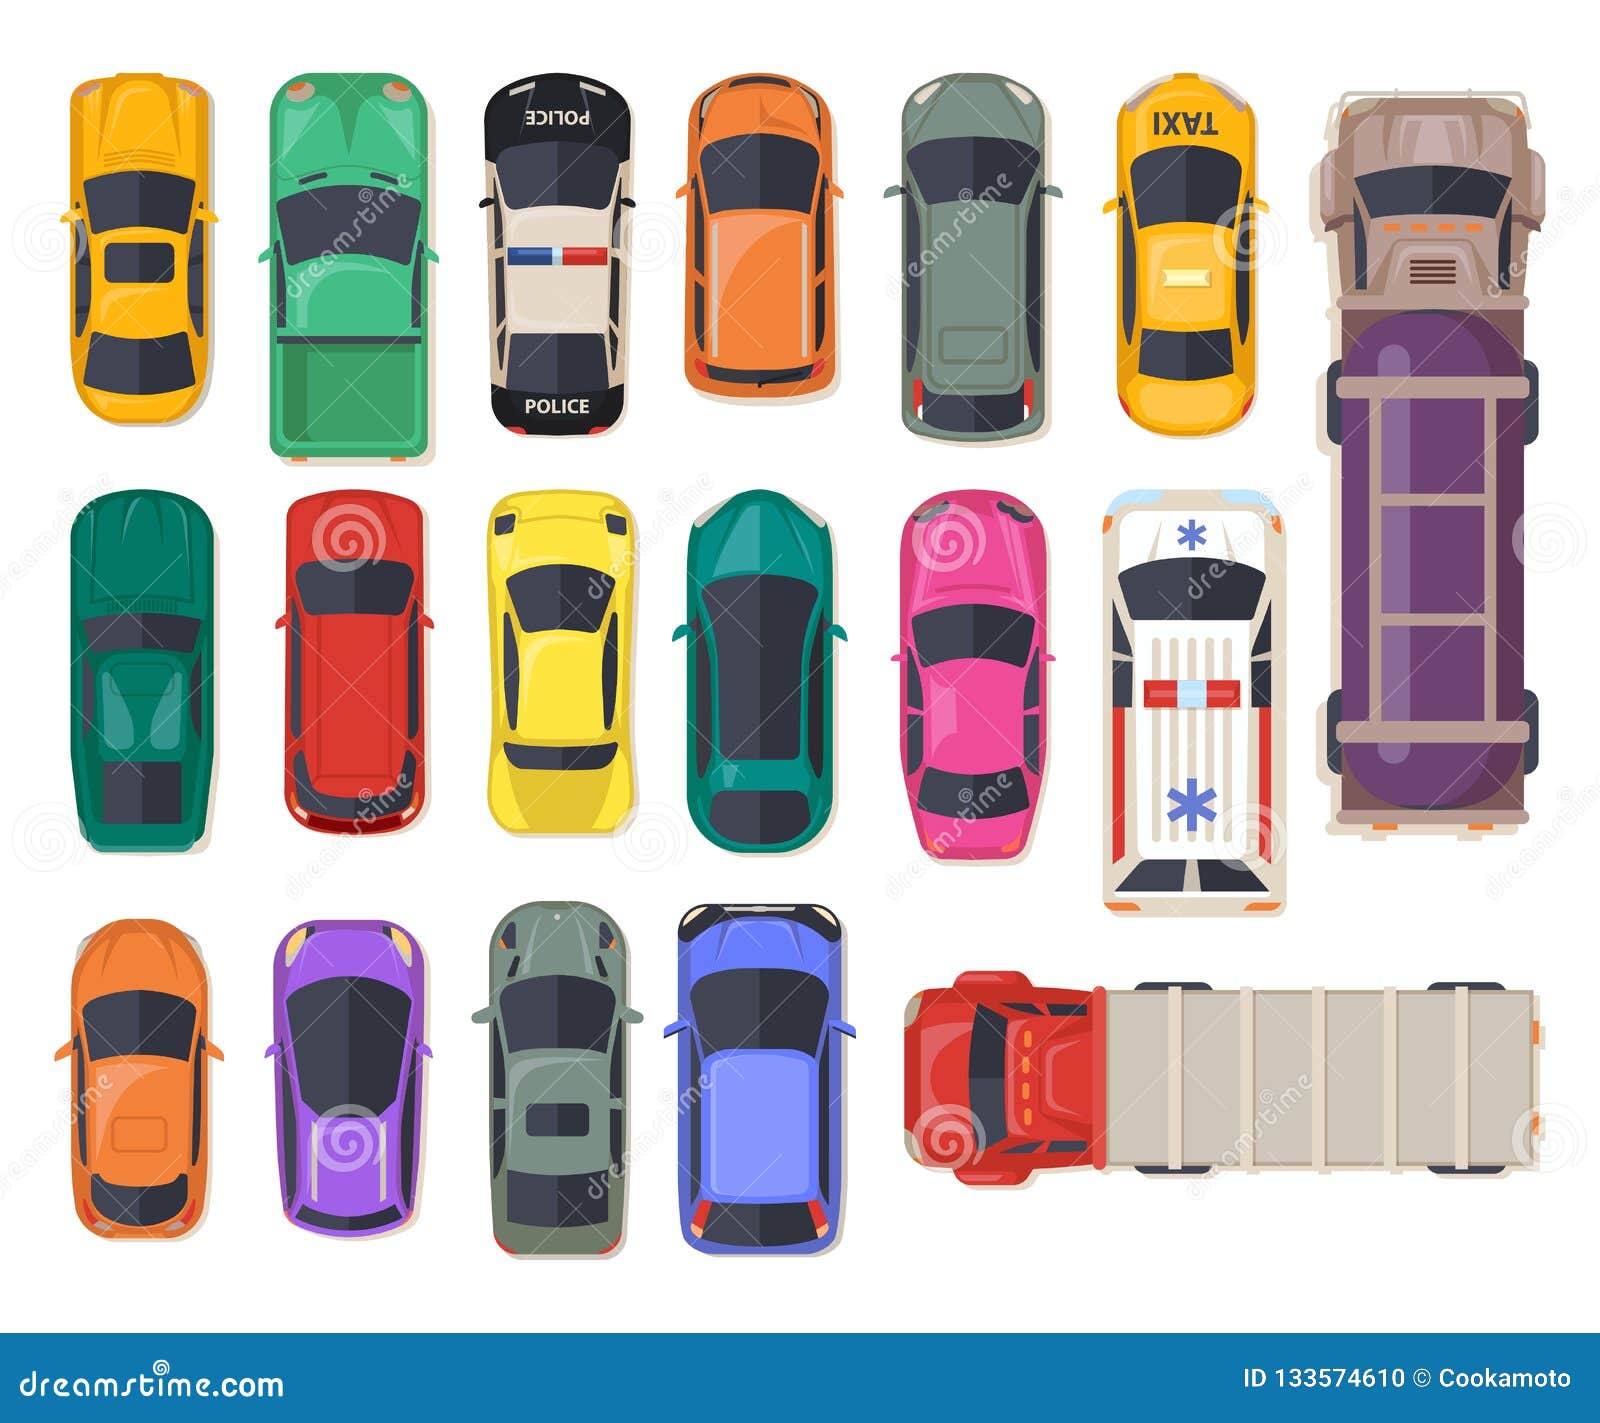 top view on car, auto transport, police vehicle